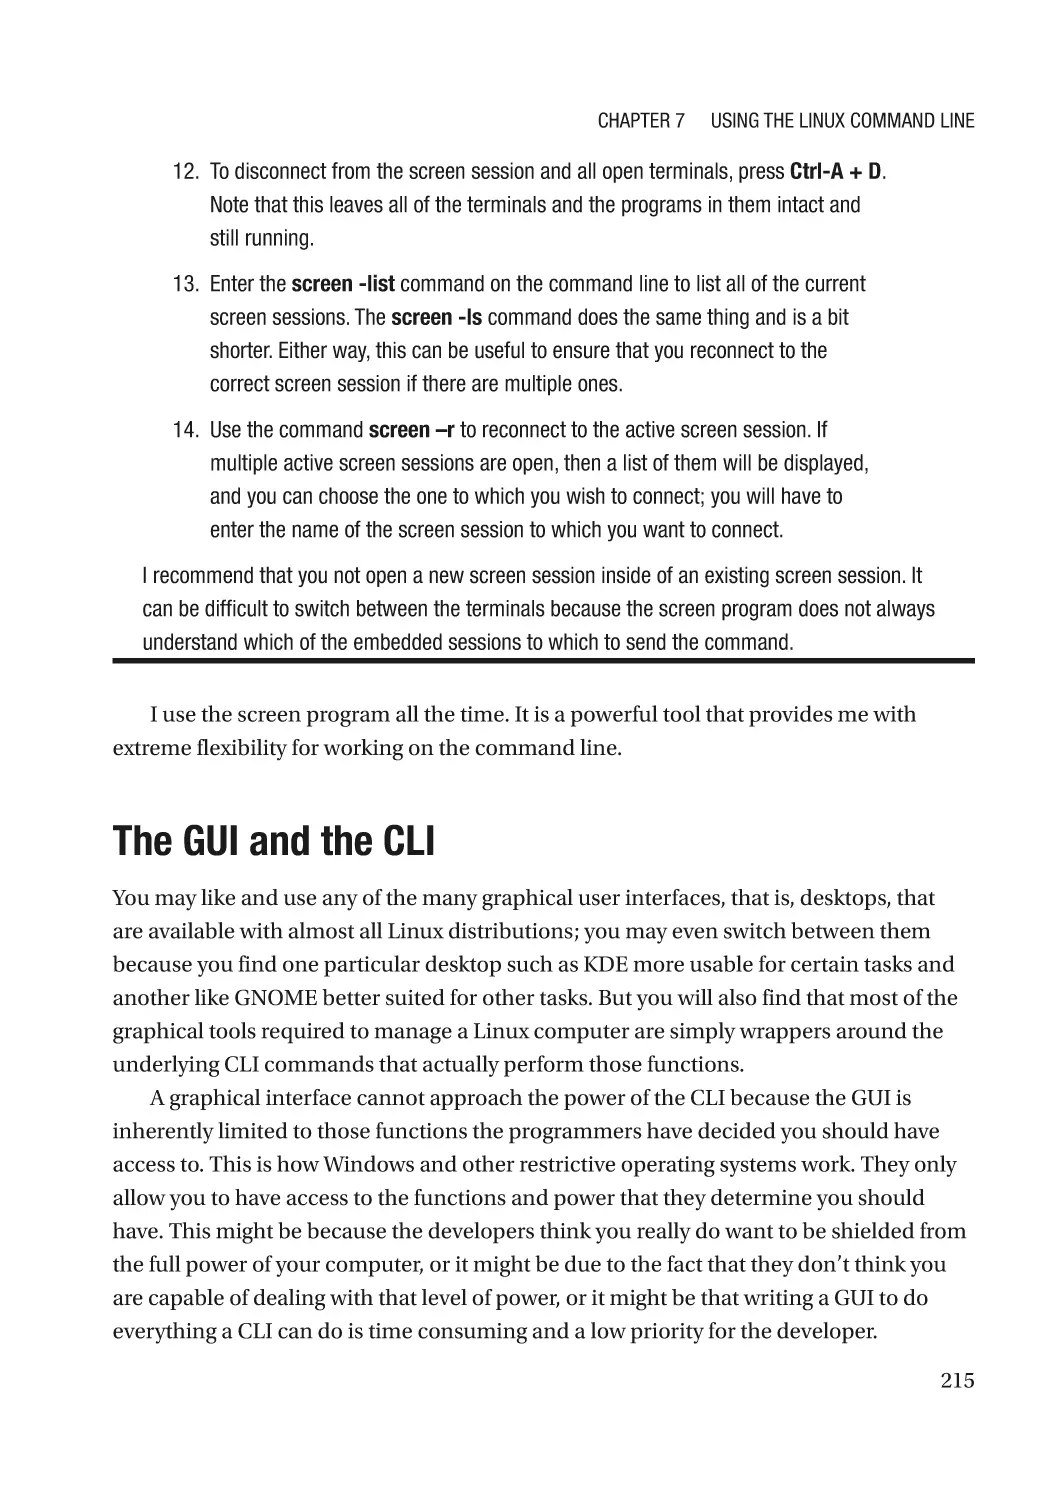 The GUI and the CLI